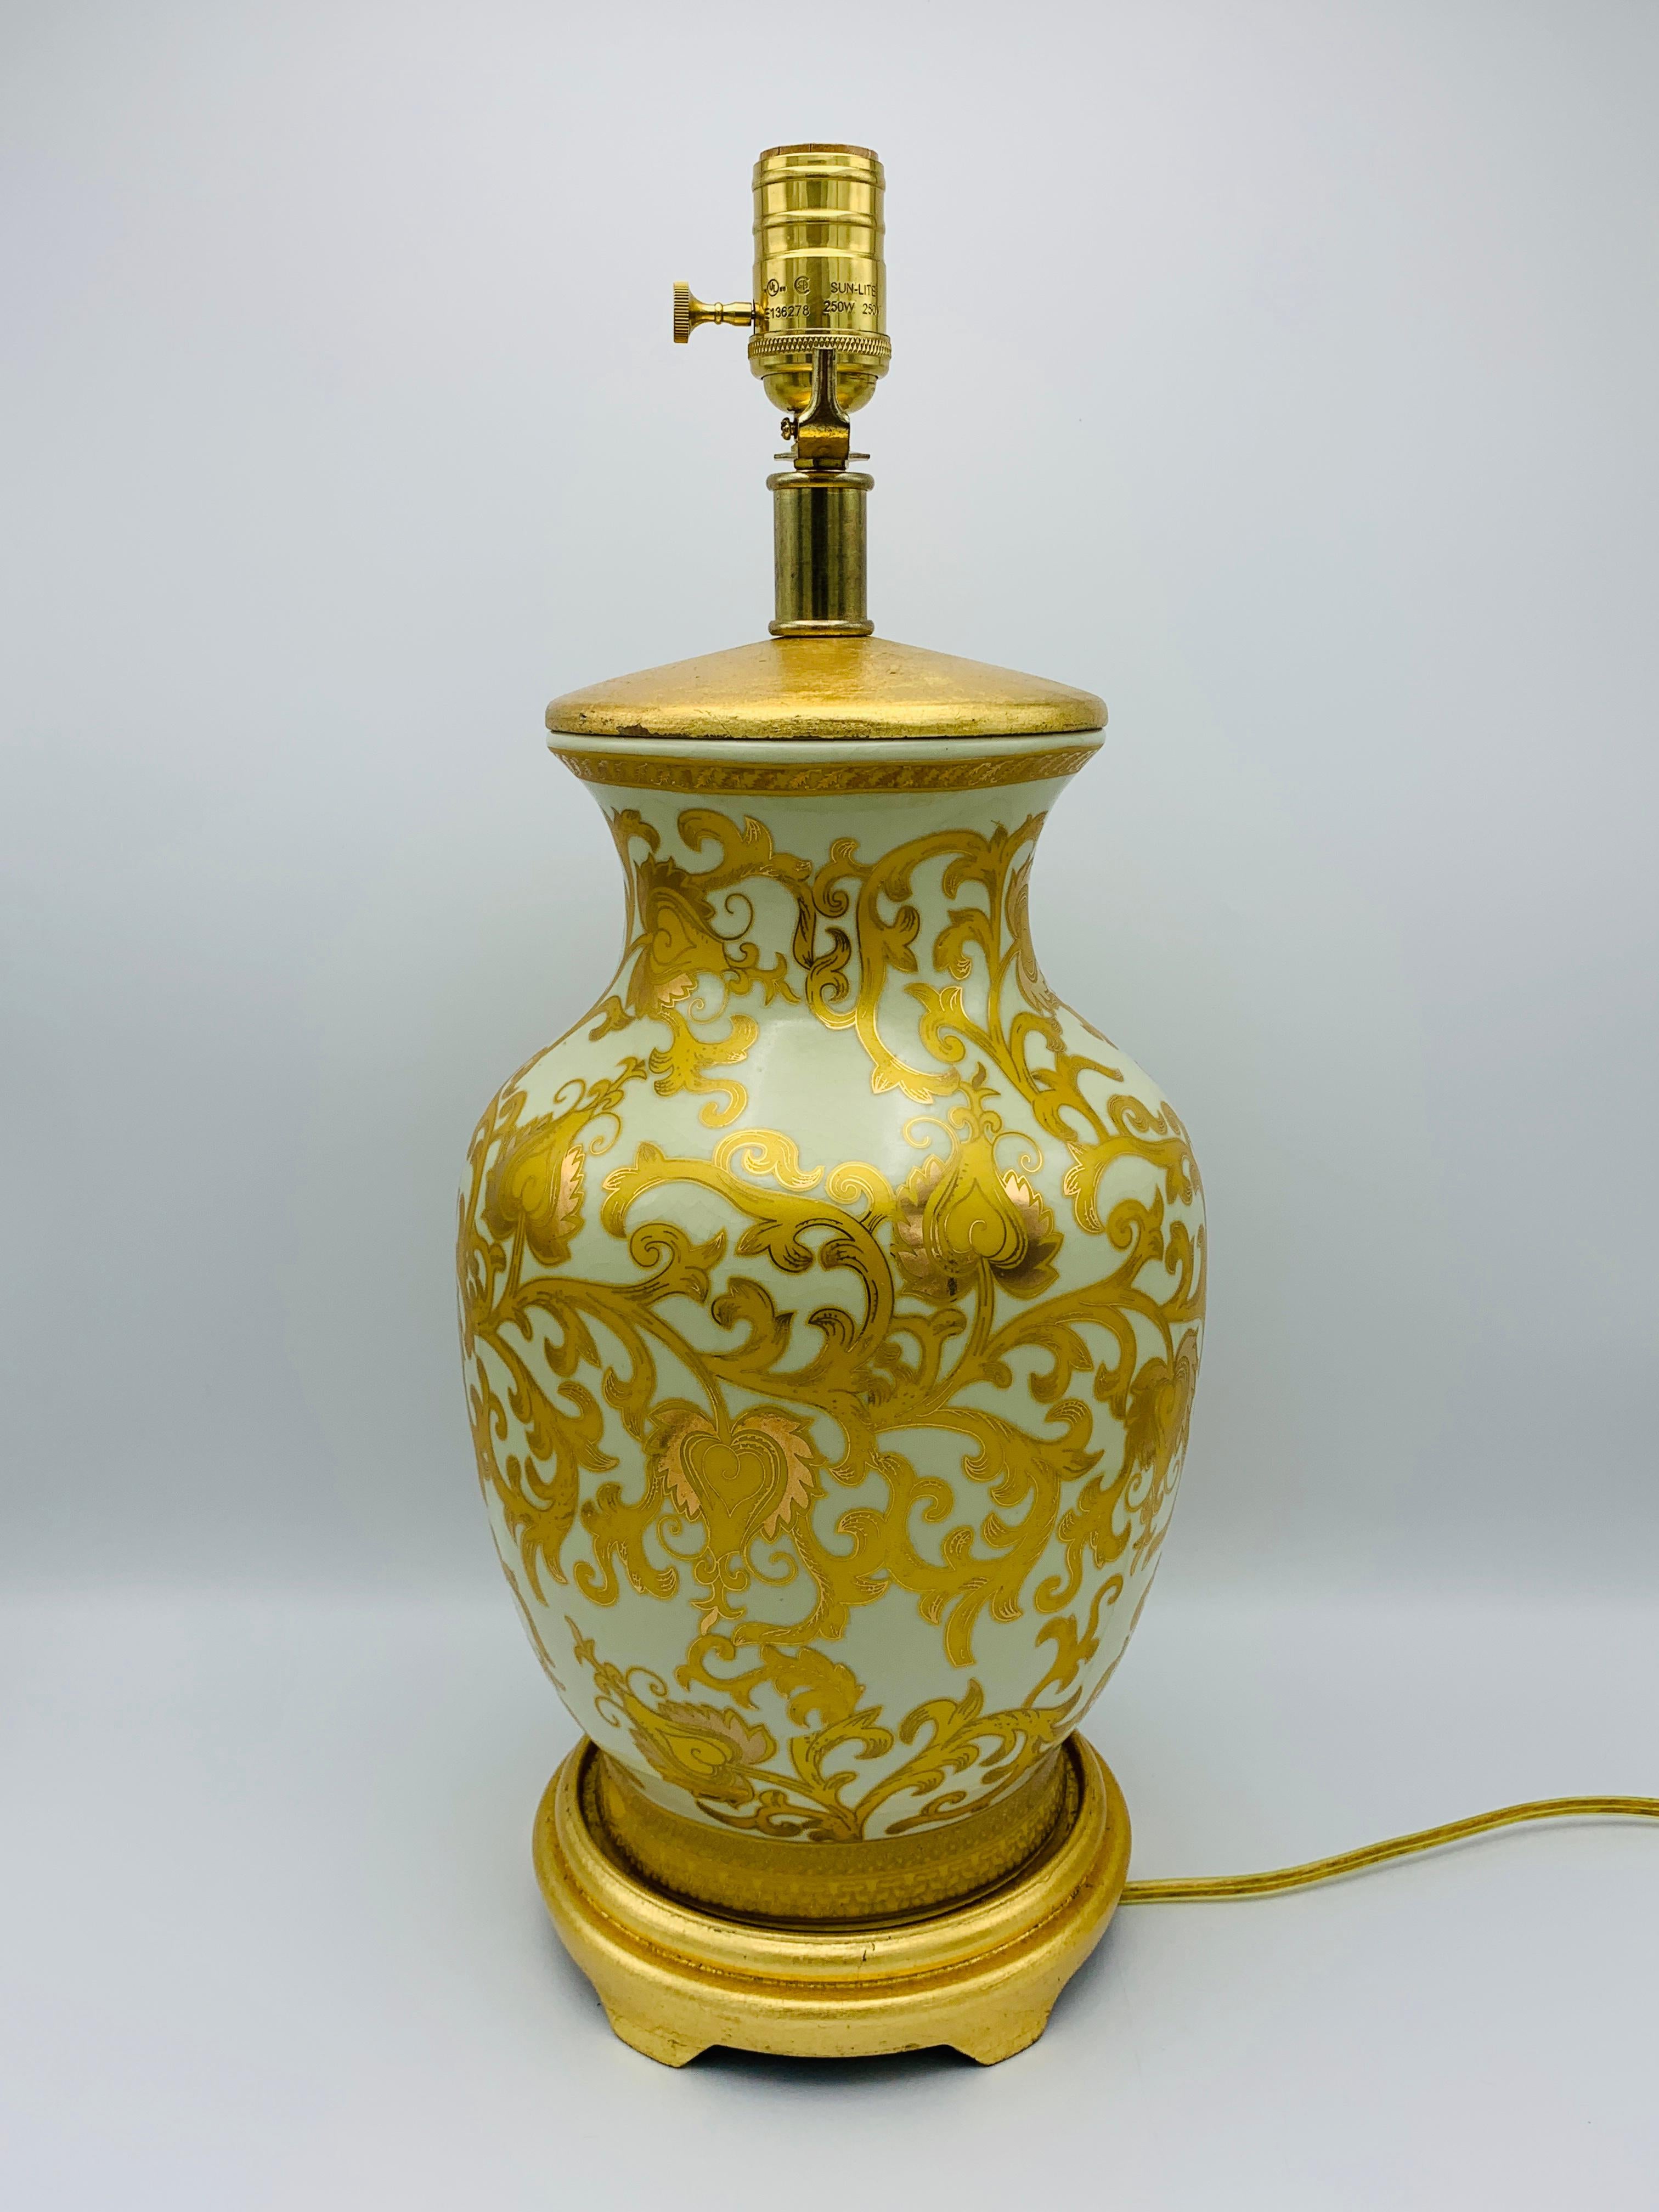 1980s Frederick Cooper Gold Damask Urn Lamp with Gilt Detailing For Sale 2